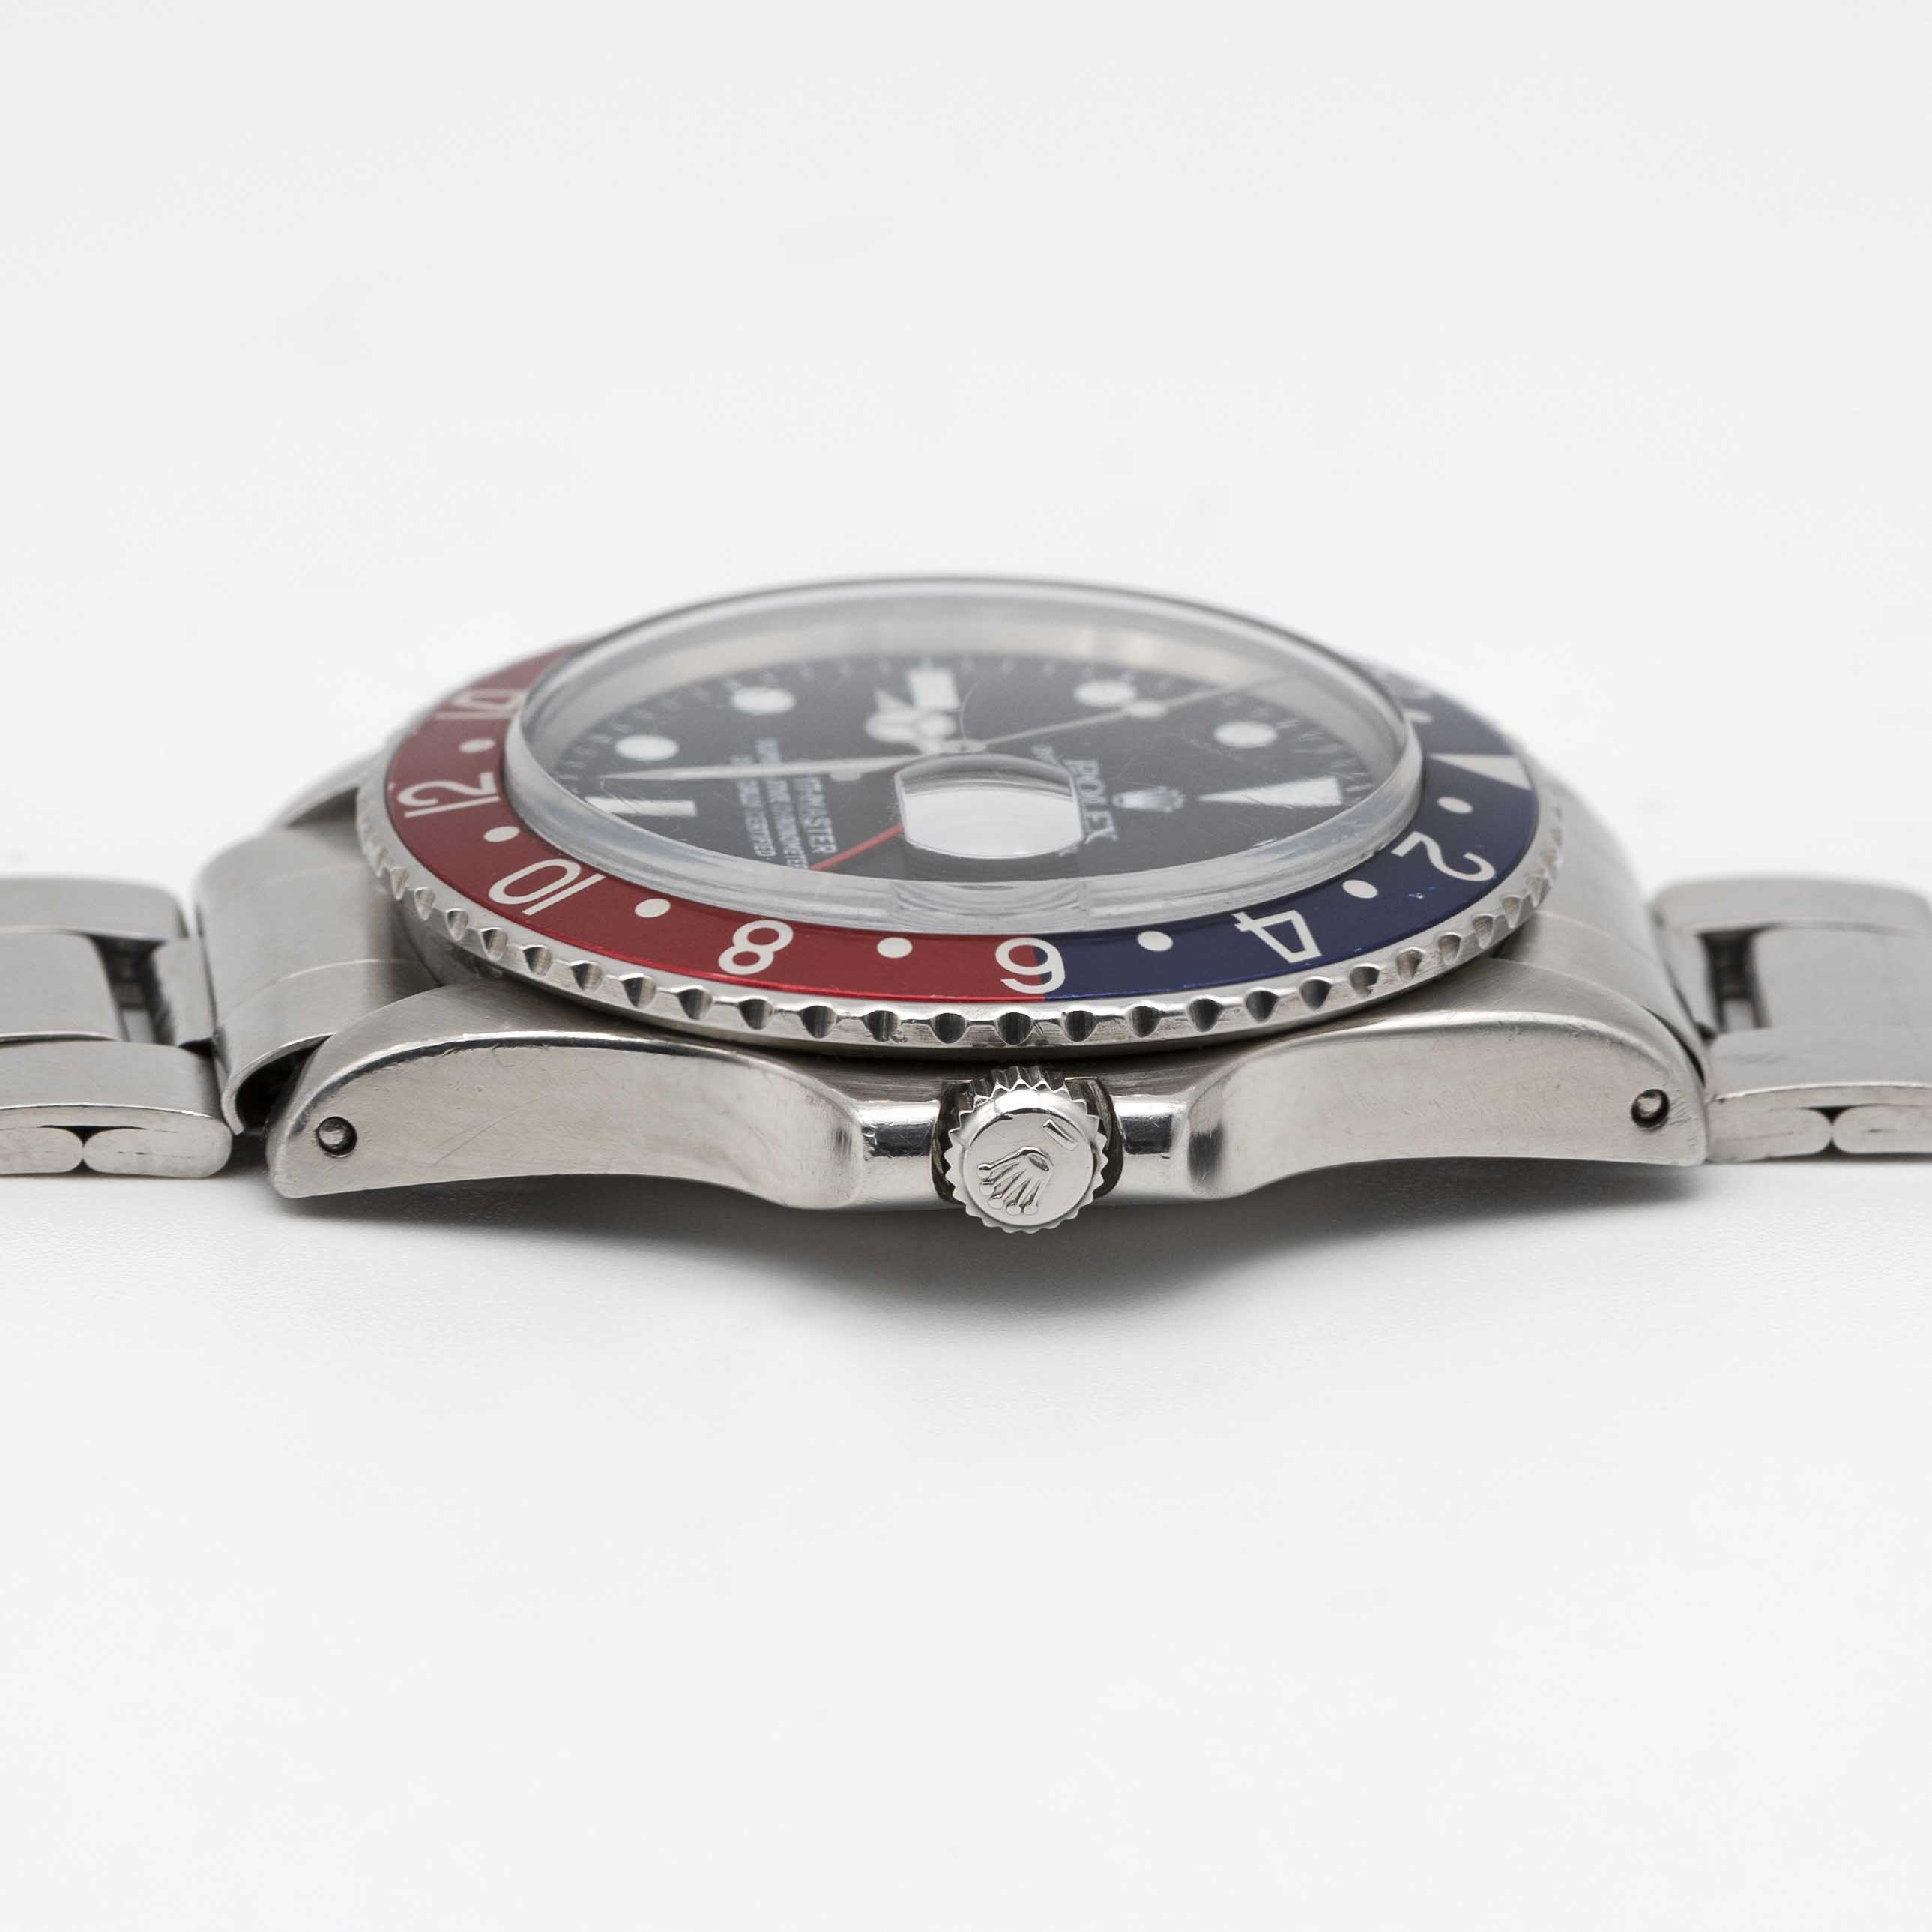 A GENTLEMAN'S STAINLESS STEEL ROLEX OYSTER PERPETUAL DATE GMT MASTER "PEPSI" BRACELET WATCH CIRCA - Image 8 of 10